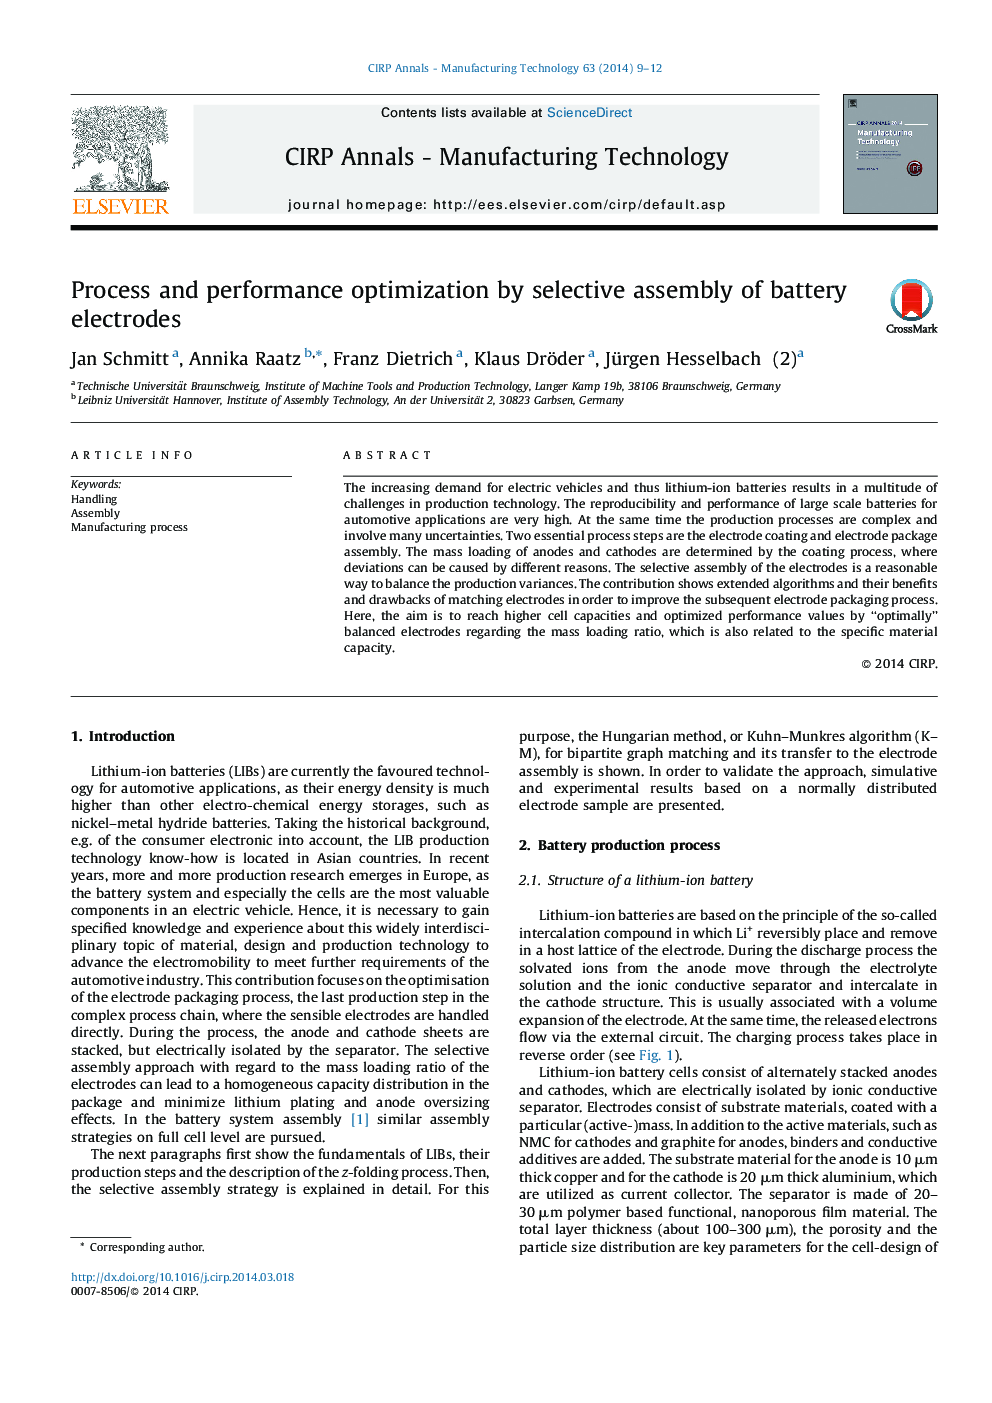 Process and performance optimization by selective assembly of battery electrodes